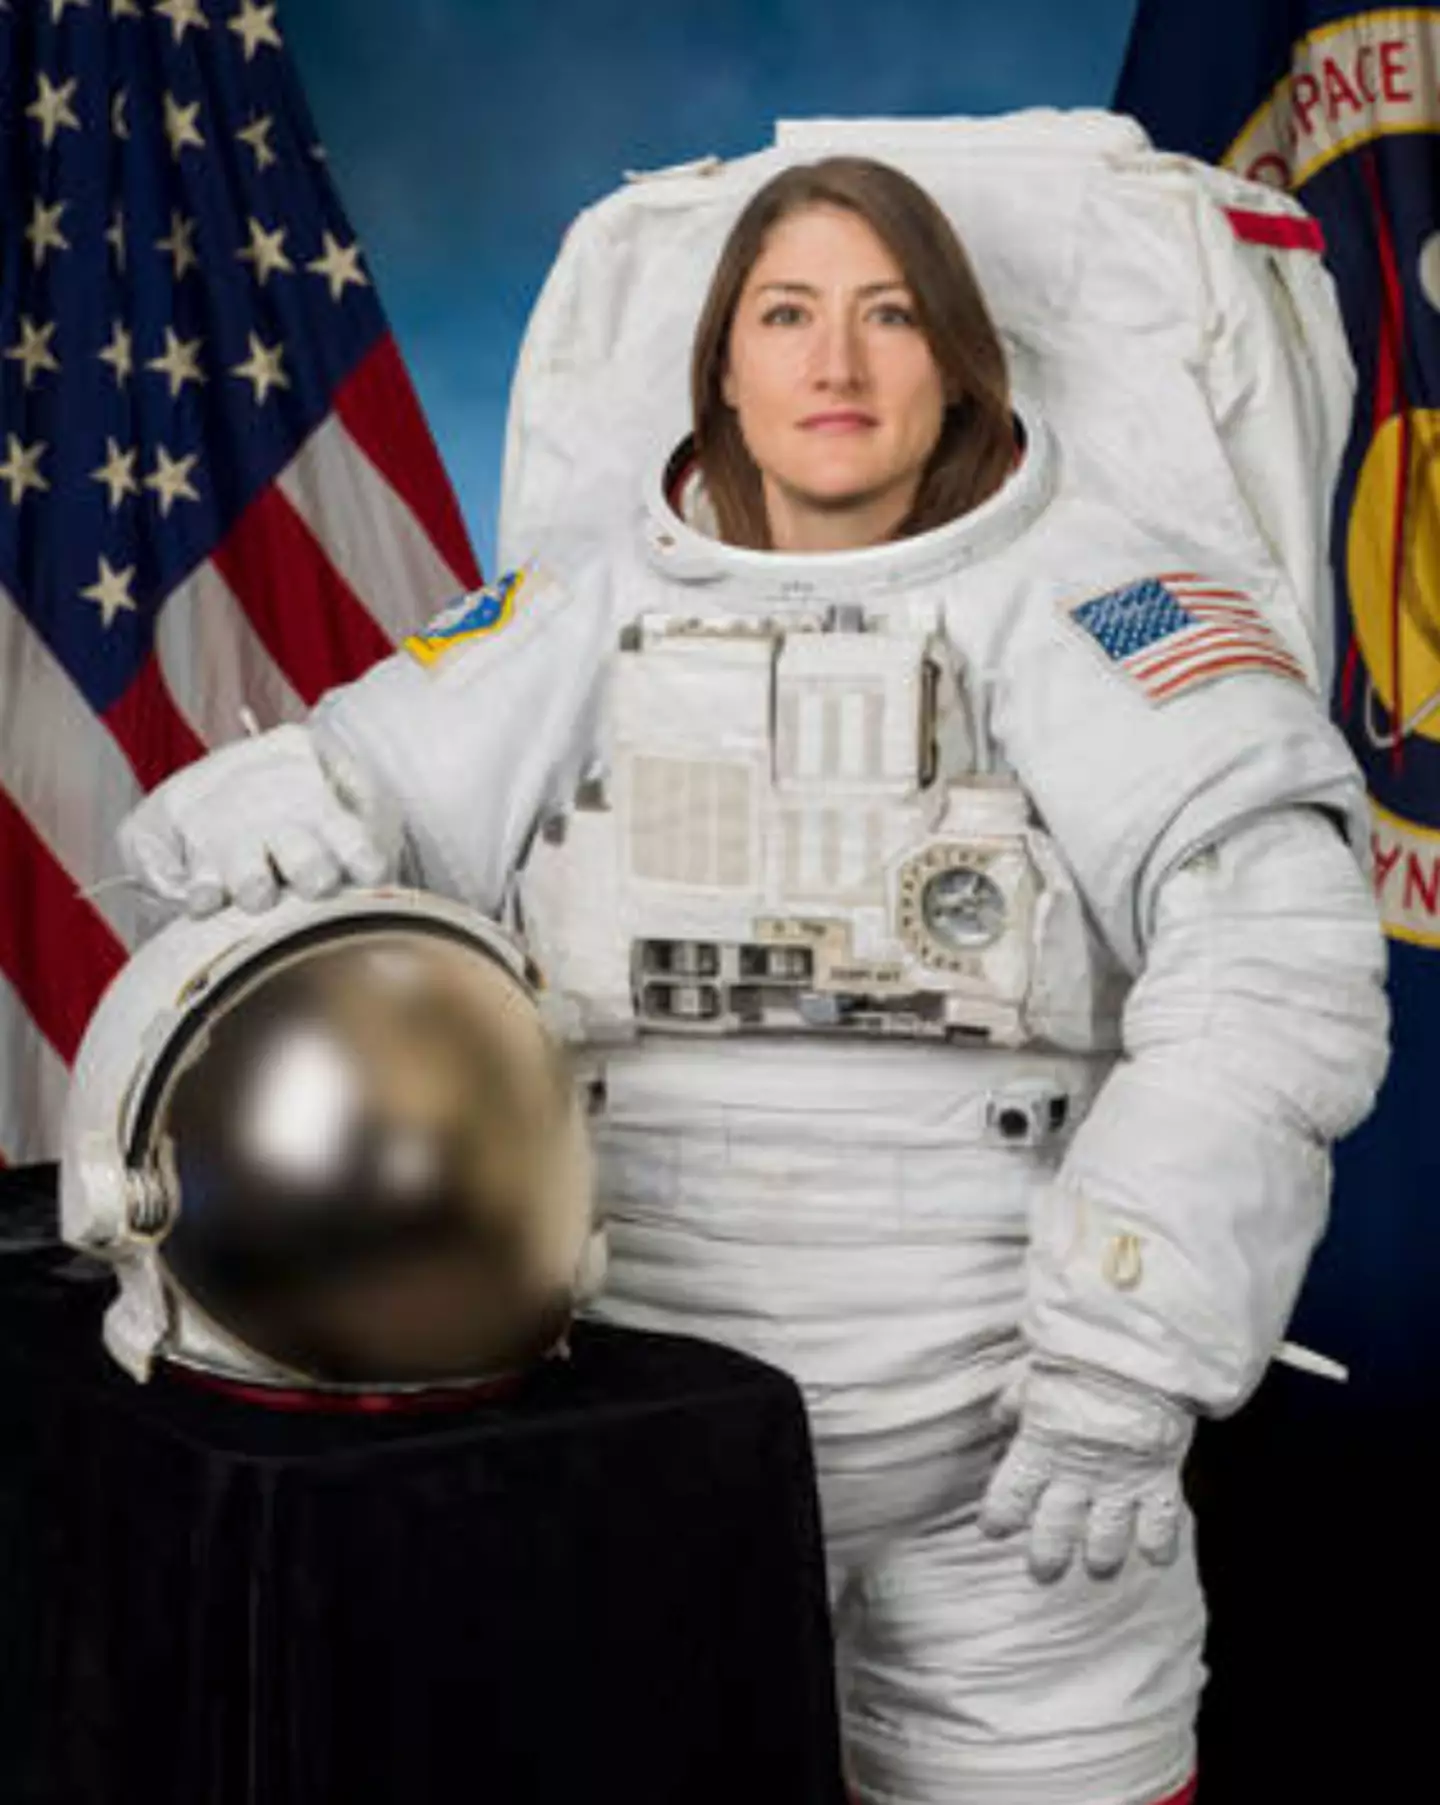 Koch set a record for the longest single spaceflight by a woman with a total of 328 days in space.